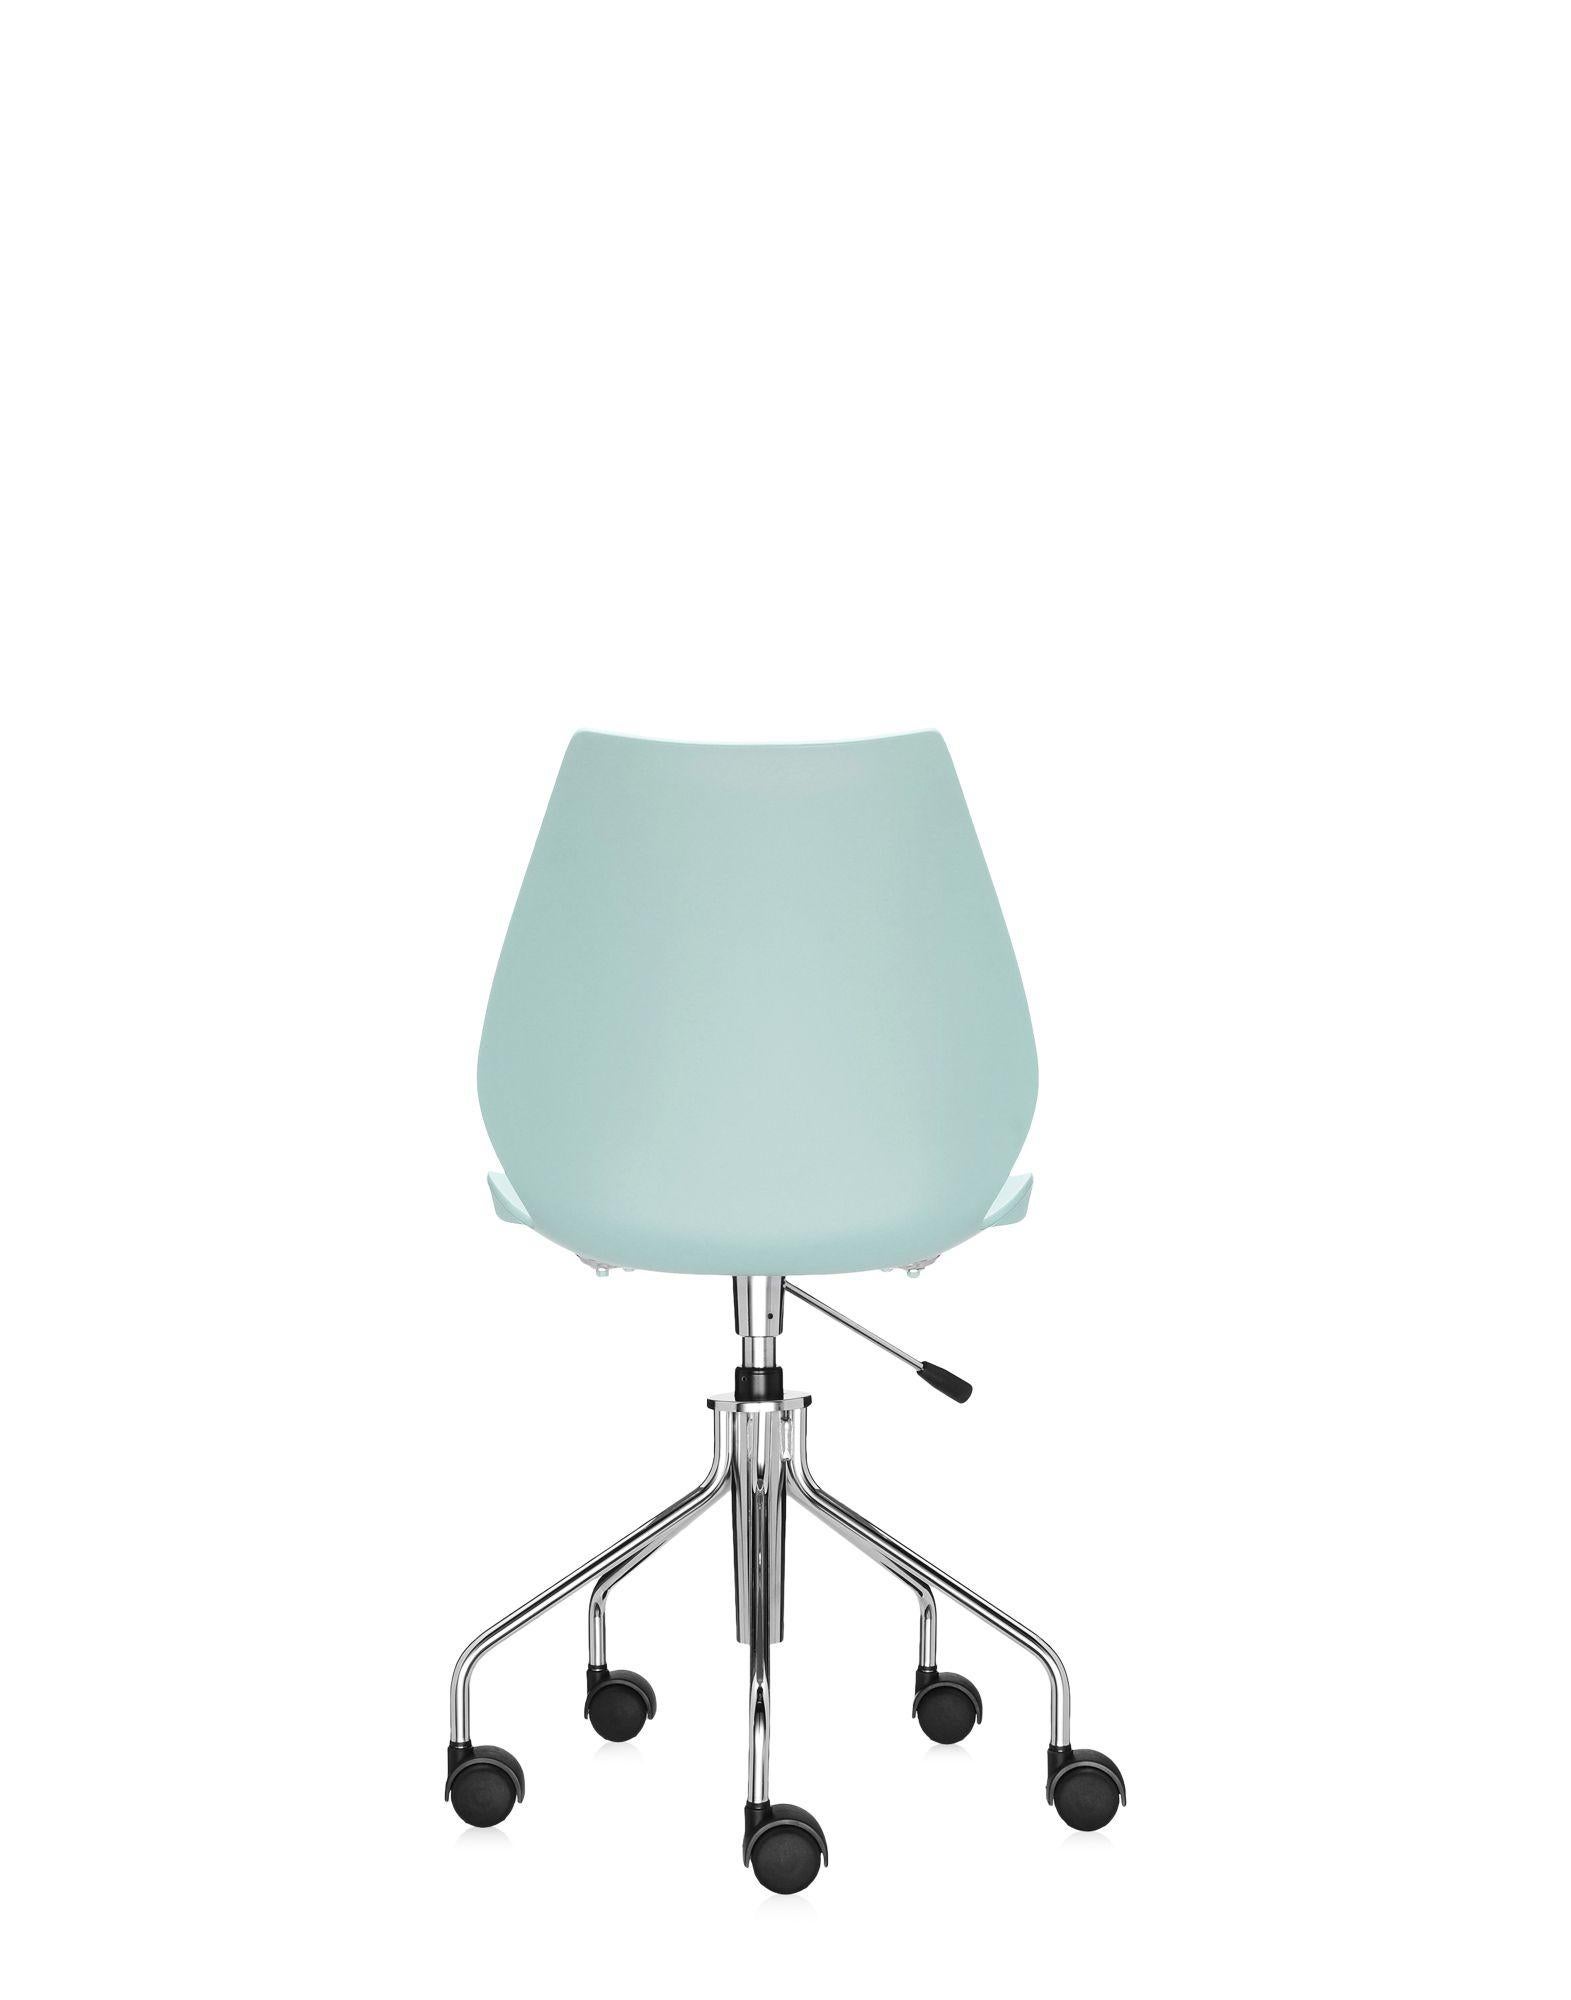 Plastic Kartell Maui Swivel Chair Adjustable in Pale Blue by Vico Magistretti